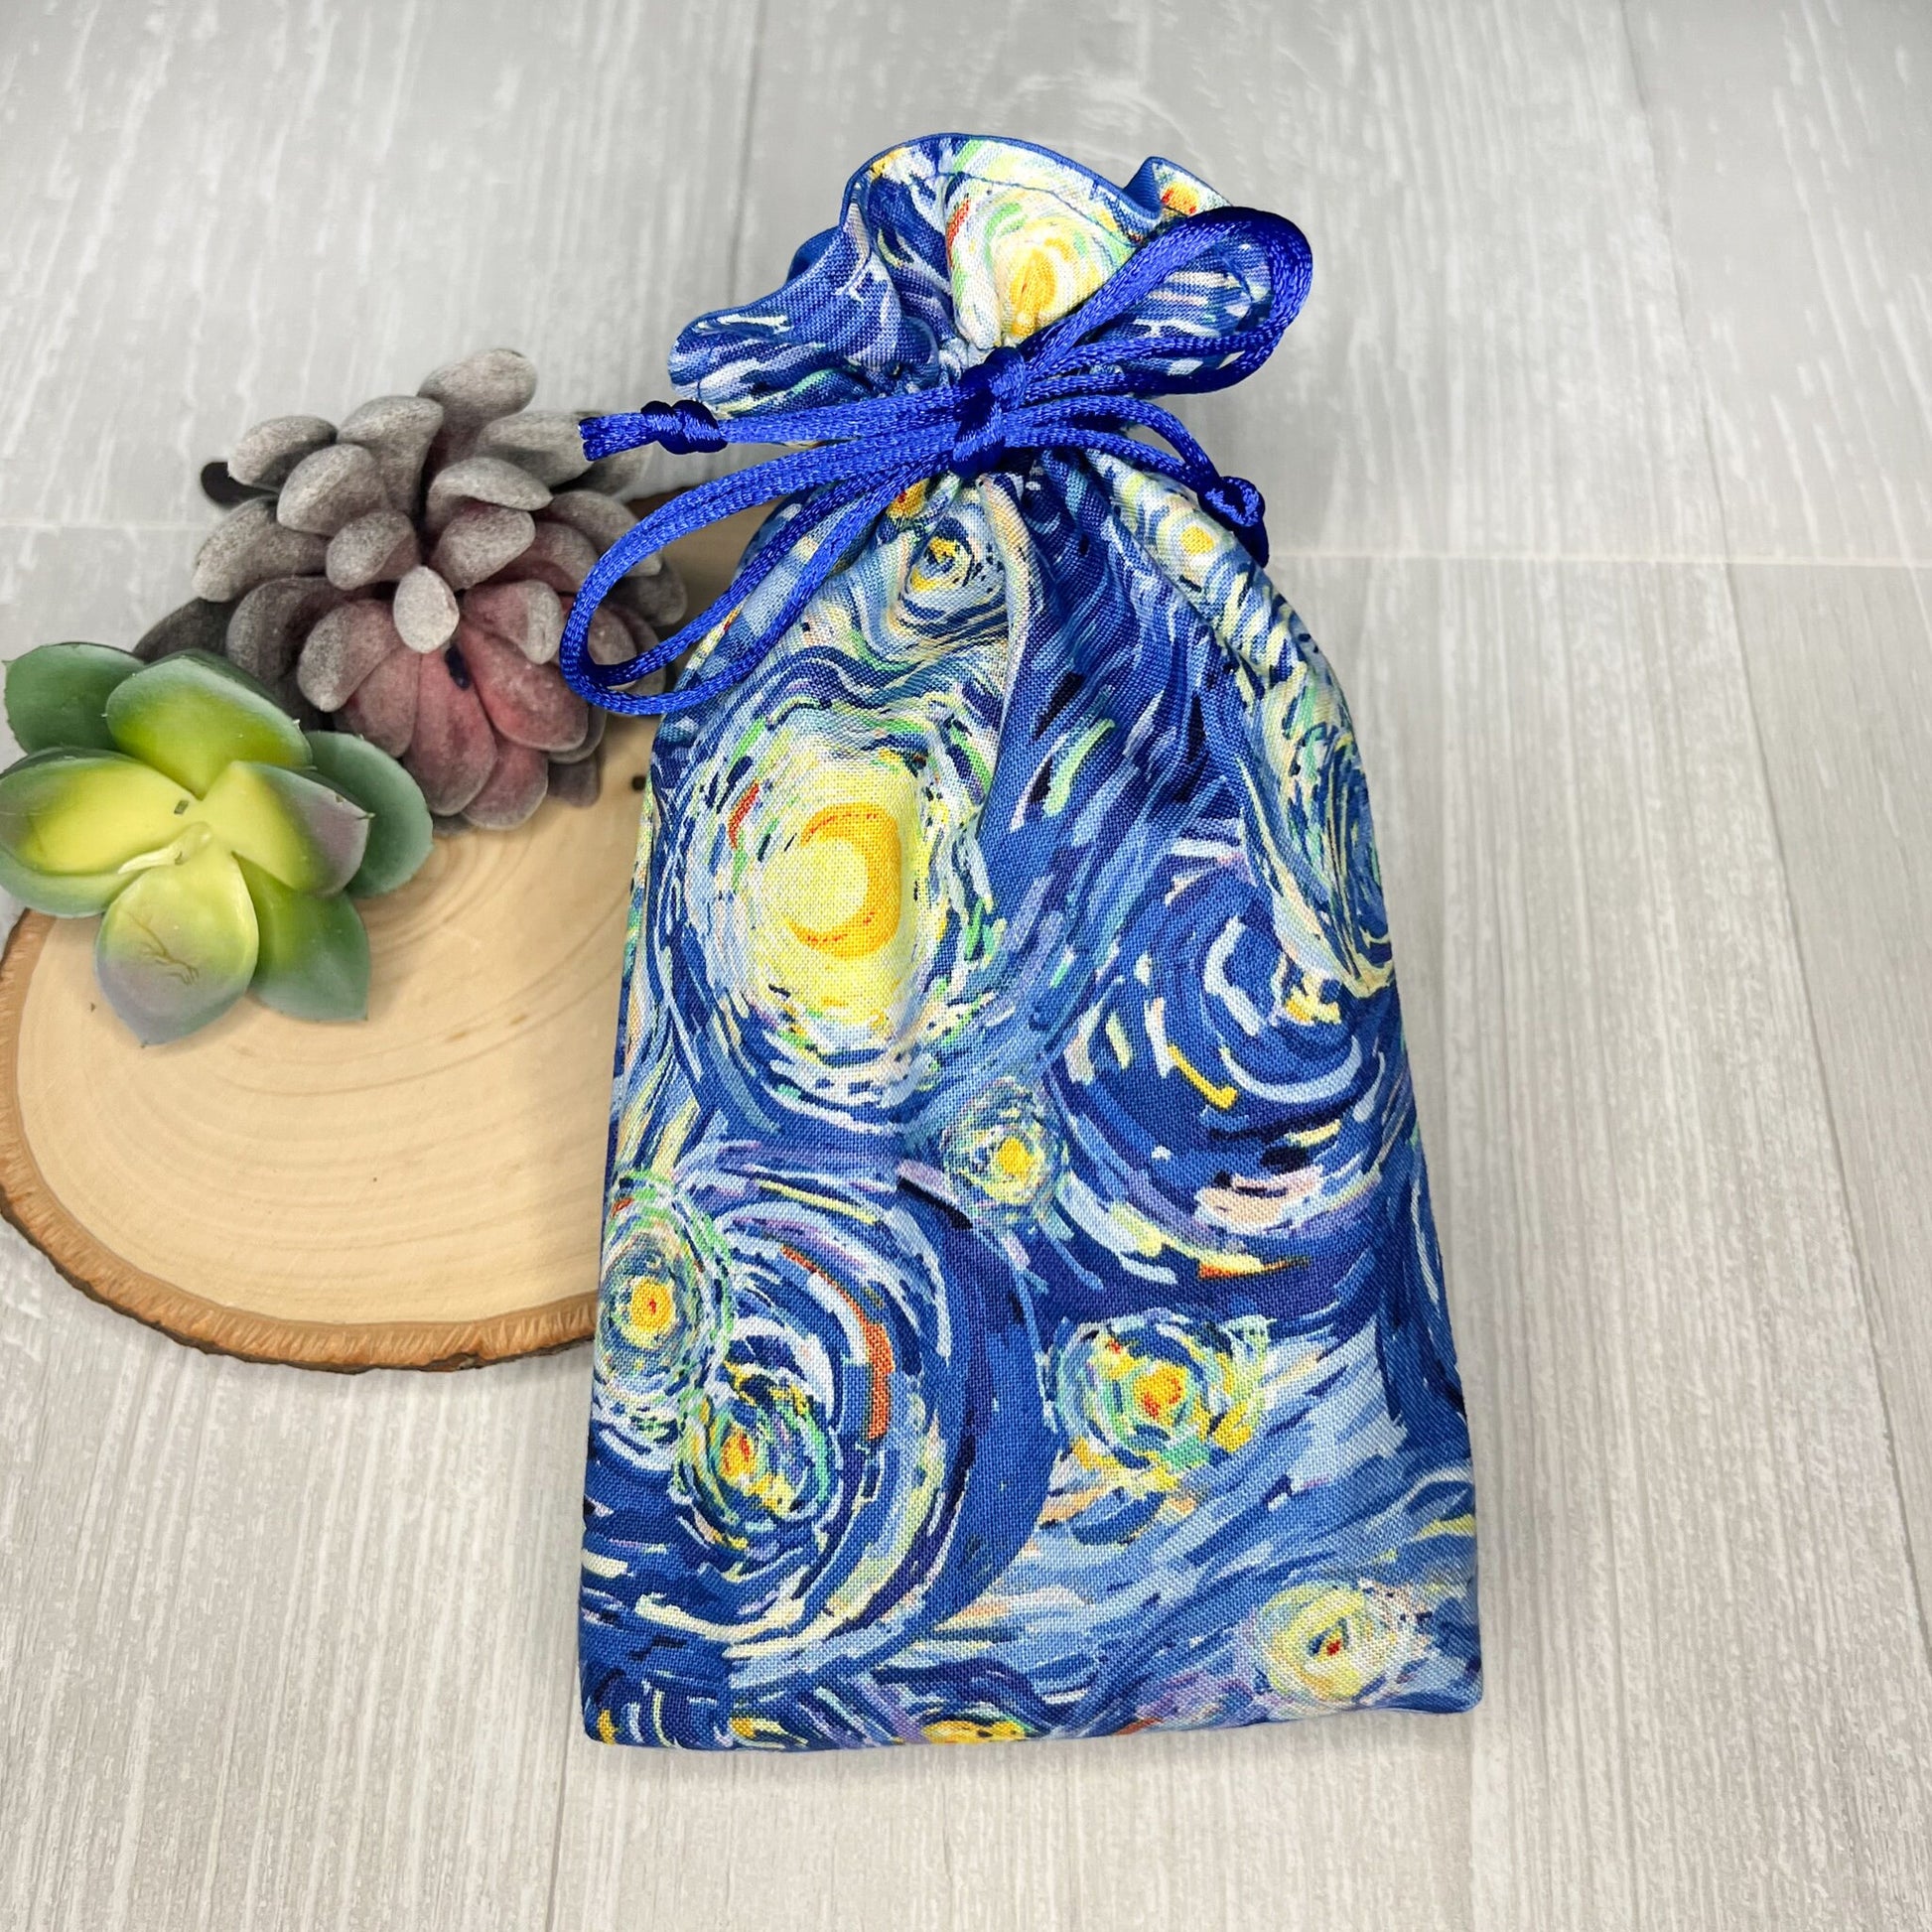 Starry Night Tarot Bag, Blue Van Gogh Drawstring Pouch, Tarot Deck Storage Holder, Pagan Witchcraft Wiccan Divination Tools Gifts & Supplies